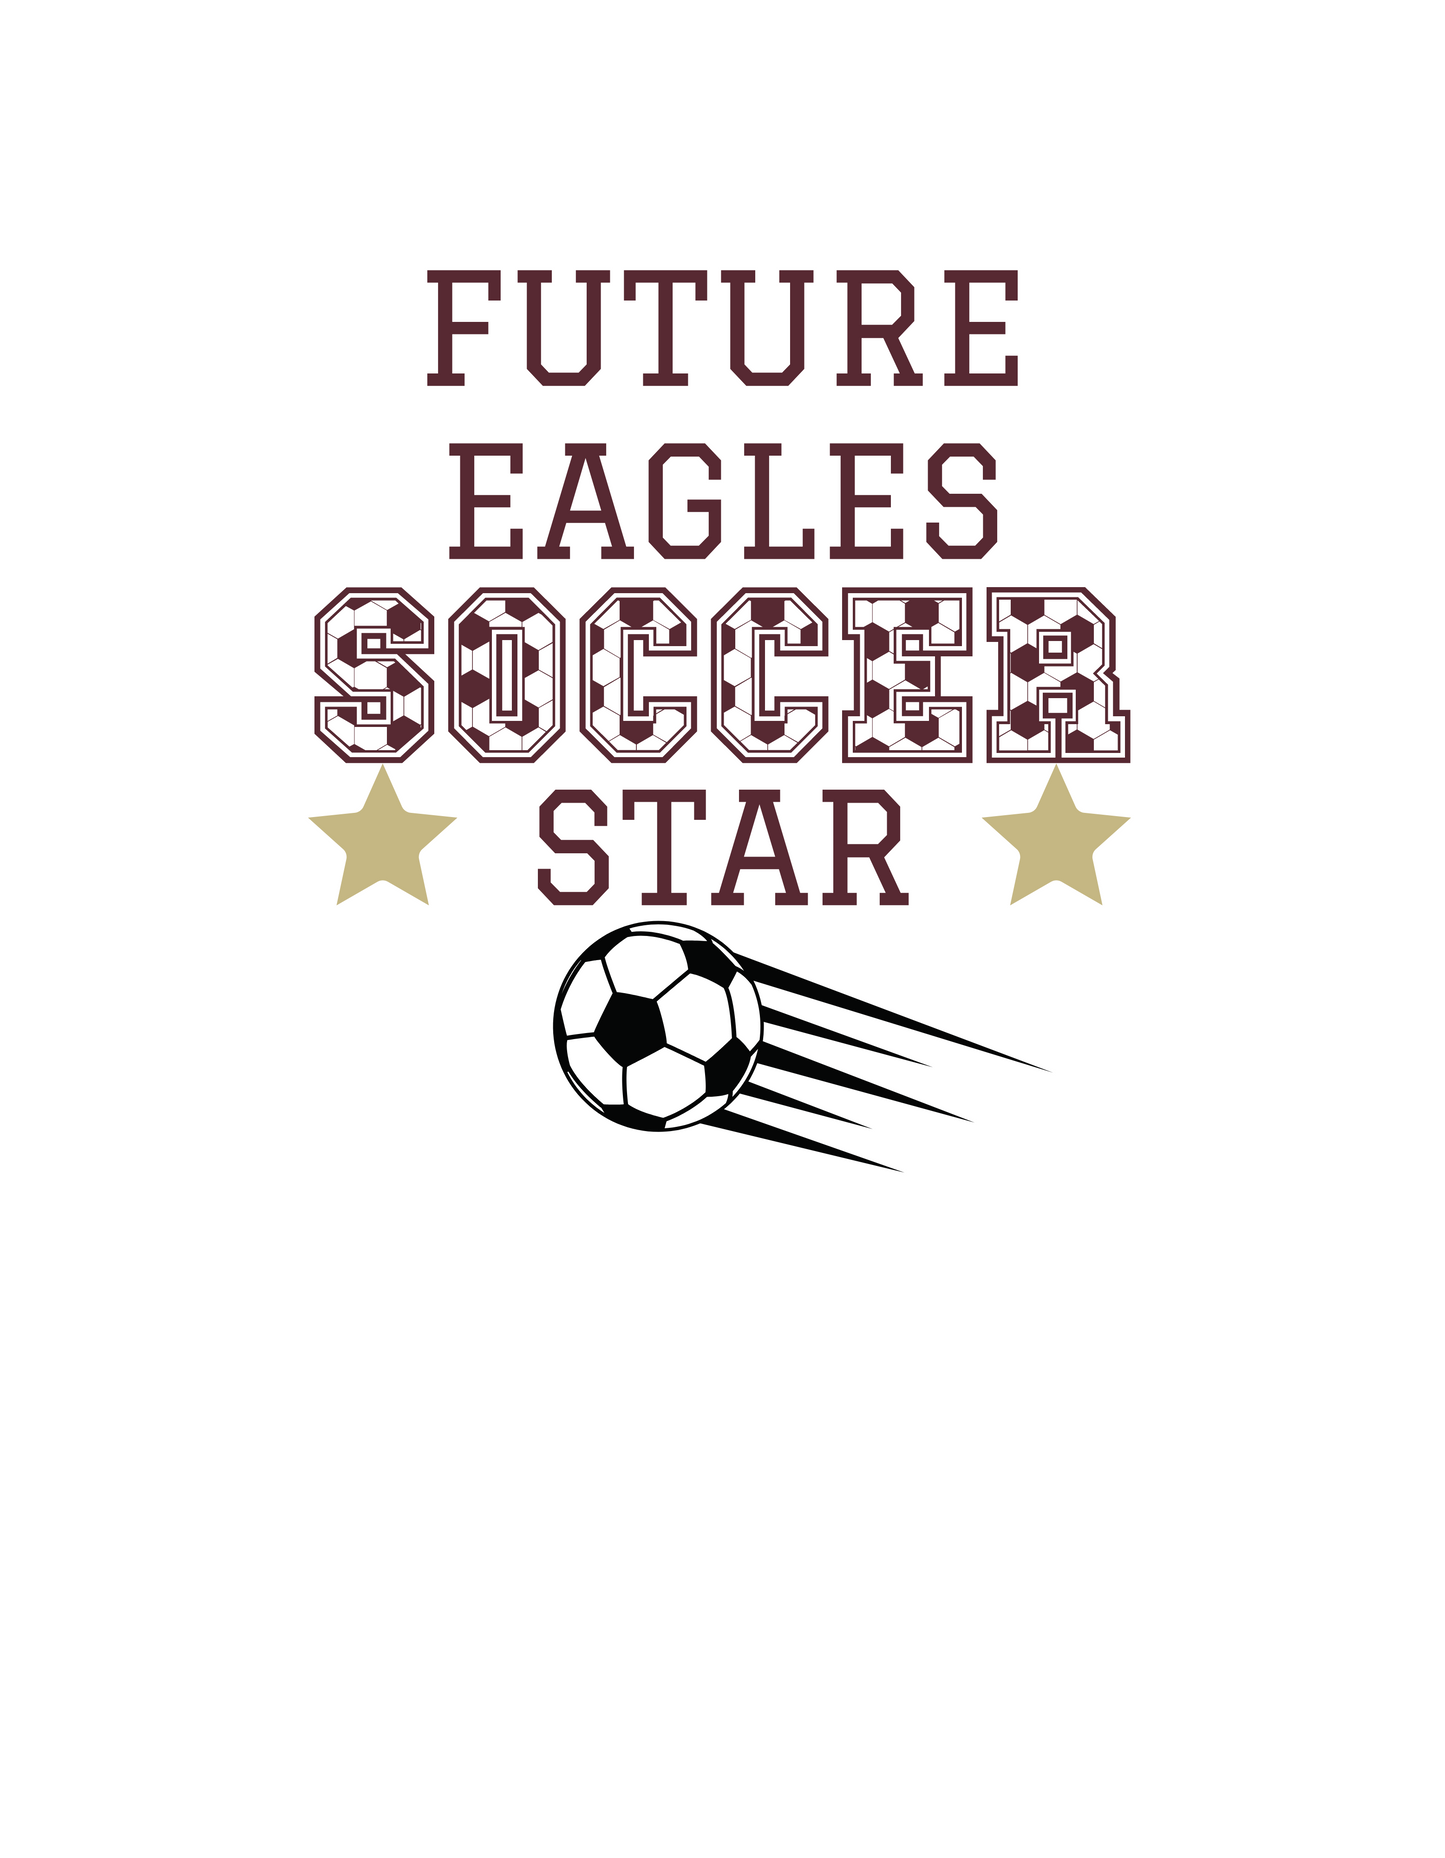 Toddler Future Soccer Star Short Sleeve Tee - New Albany Eagles